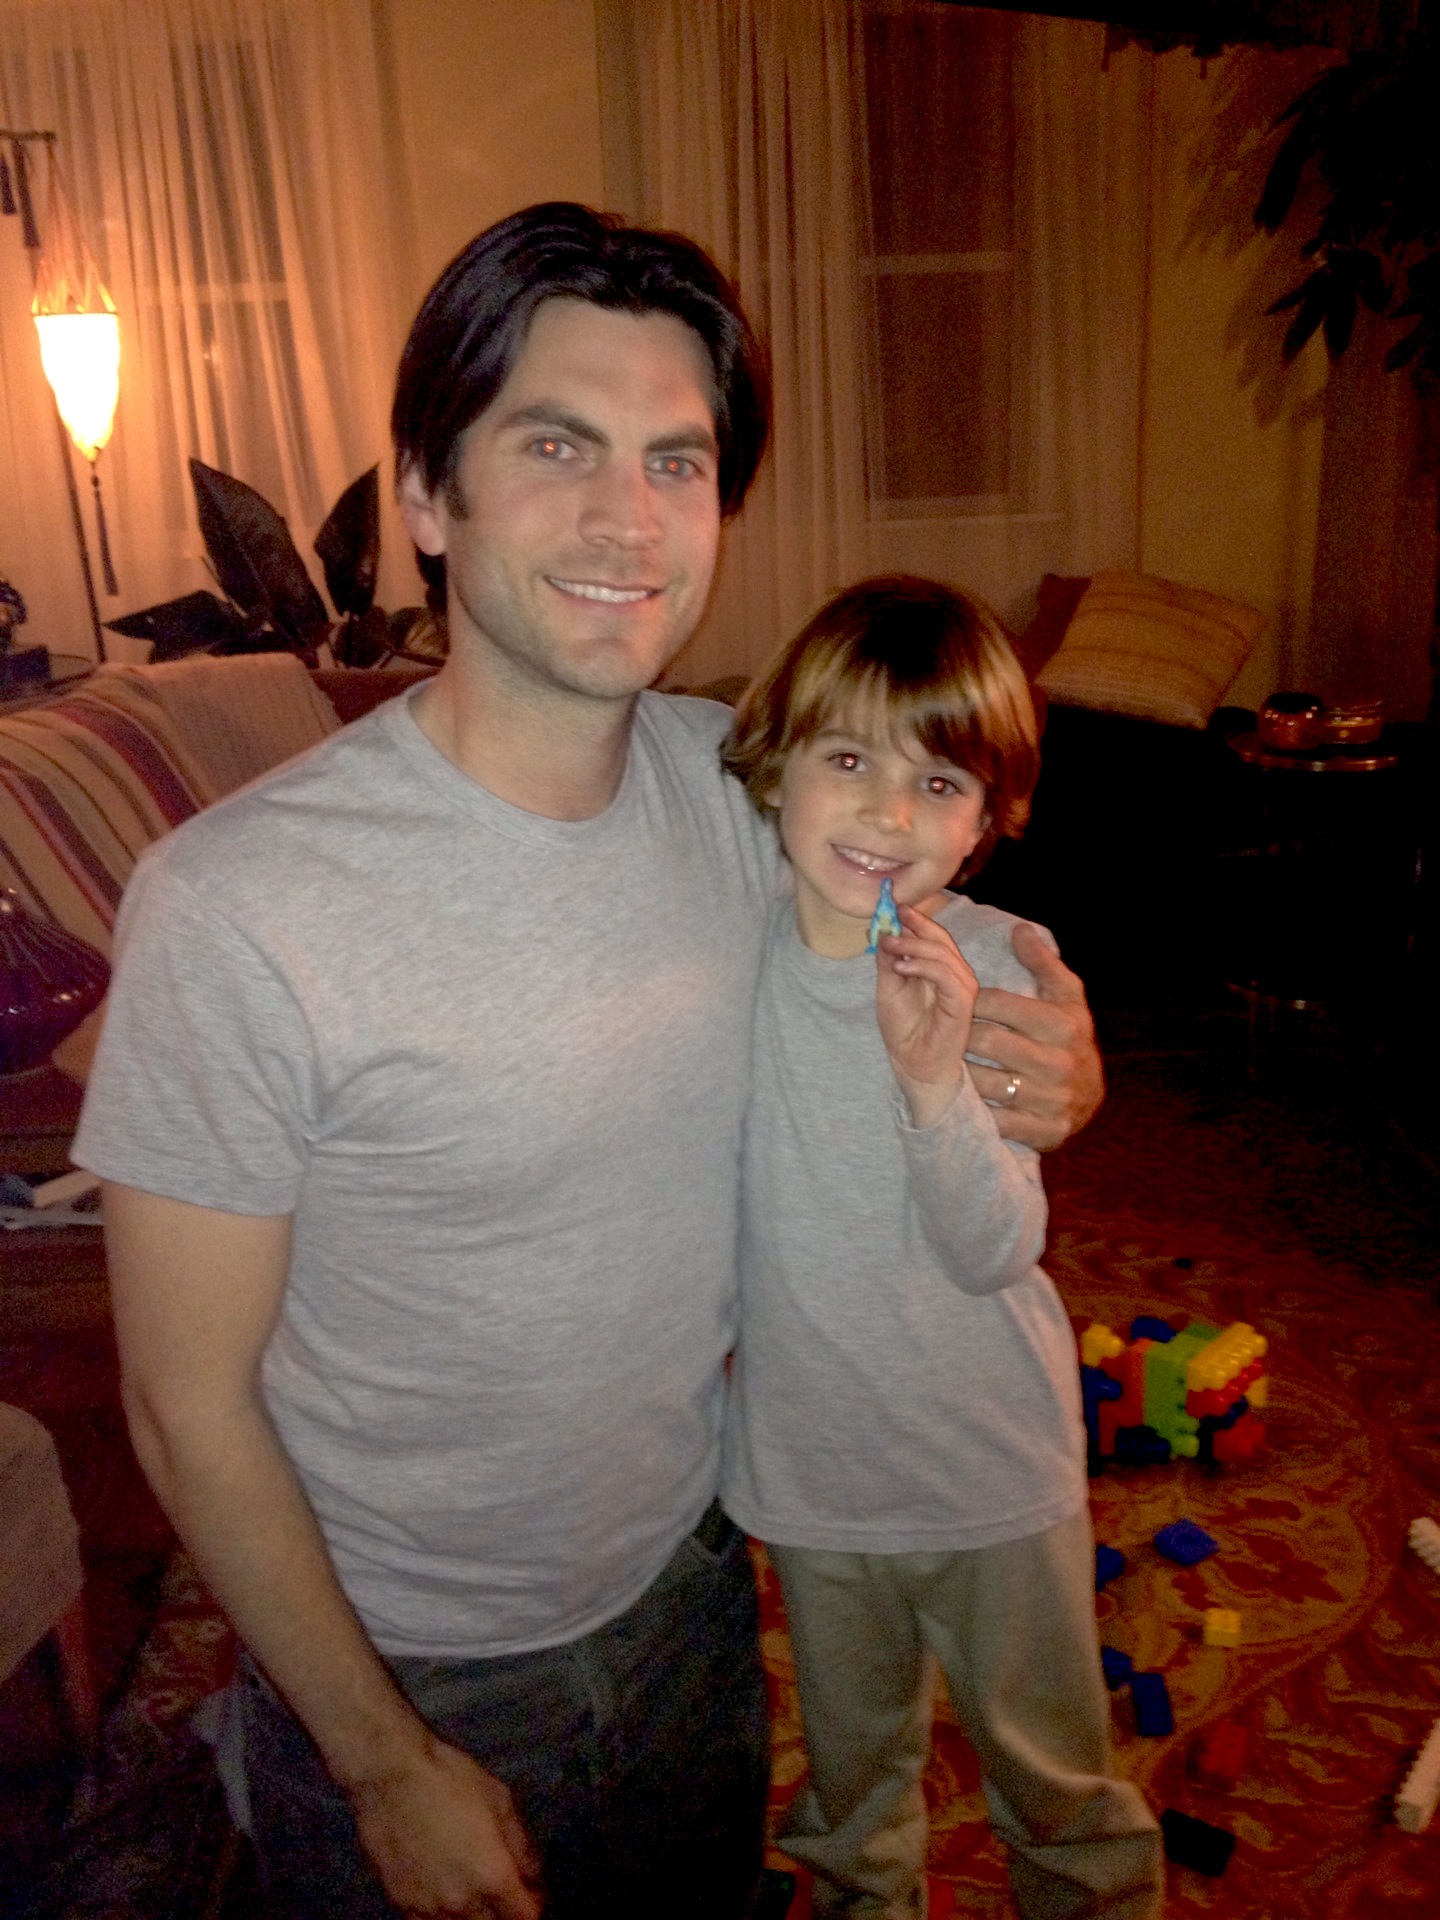 Aiden on the set of the feature film The Time Being with Hunger Game star Wes Bentley.